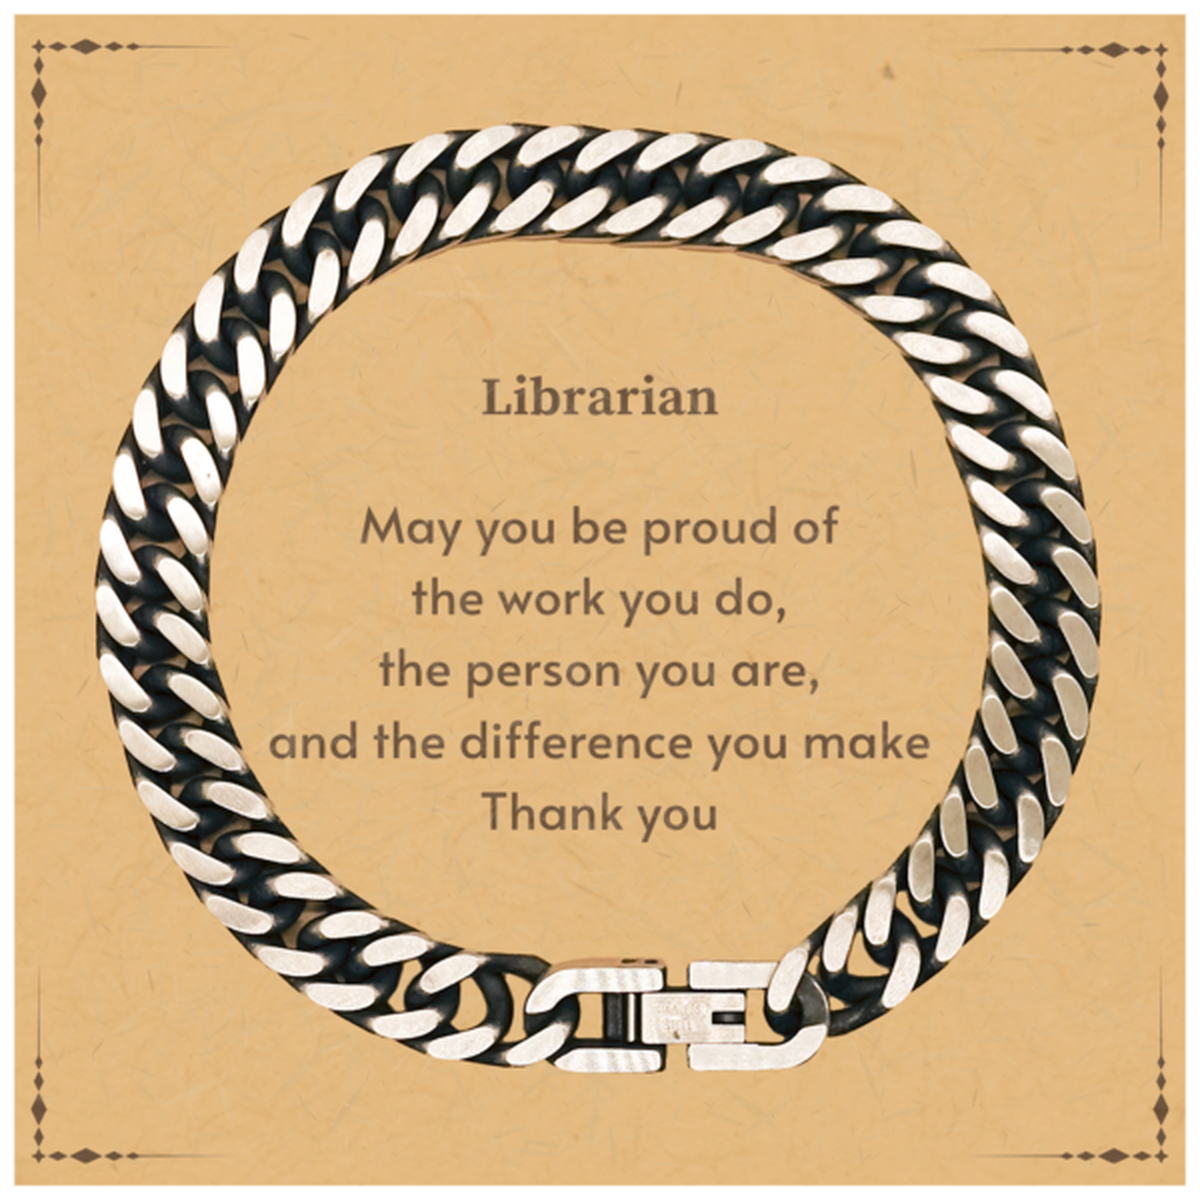 Heartwarming Cuban Link Chain Bracelet Retirement Coworkers Gifts for Librarian, Librarian May You be proud of the work you do, the person you are Gifts for Boss Men Women Friends